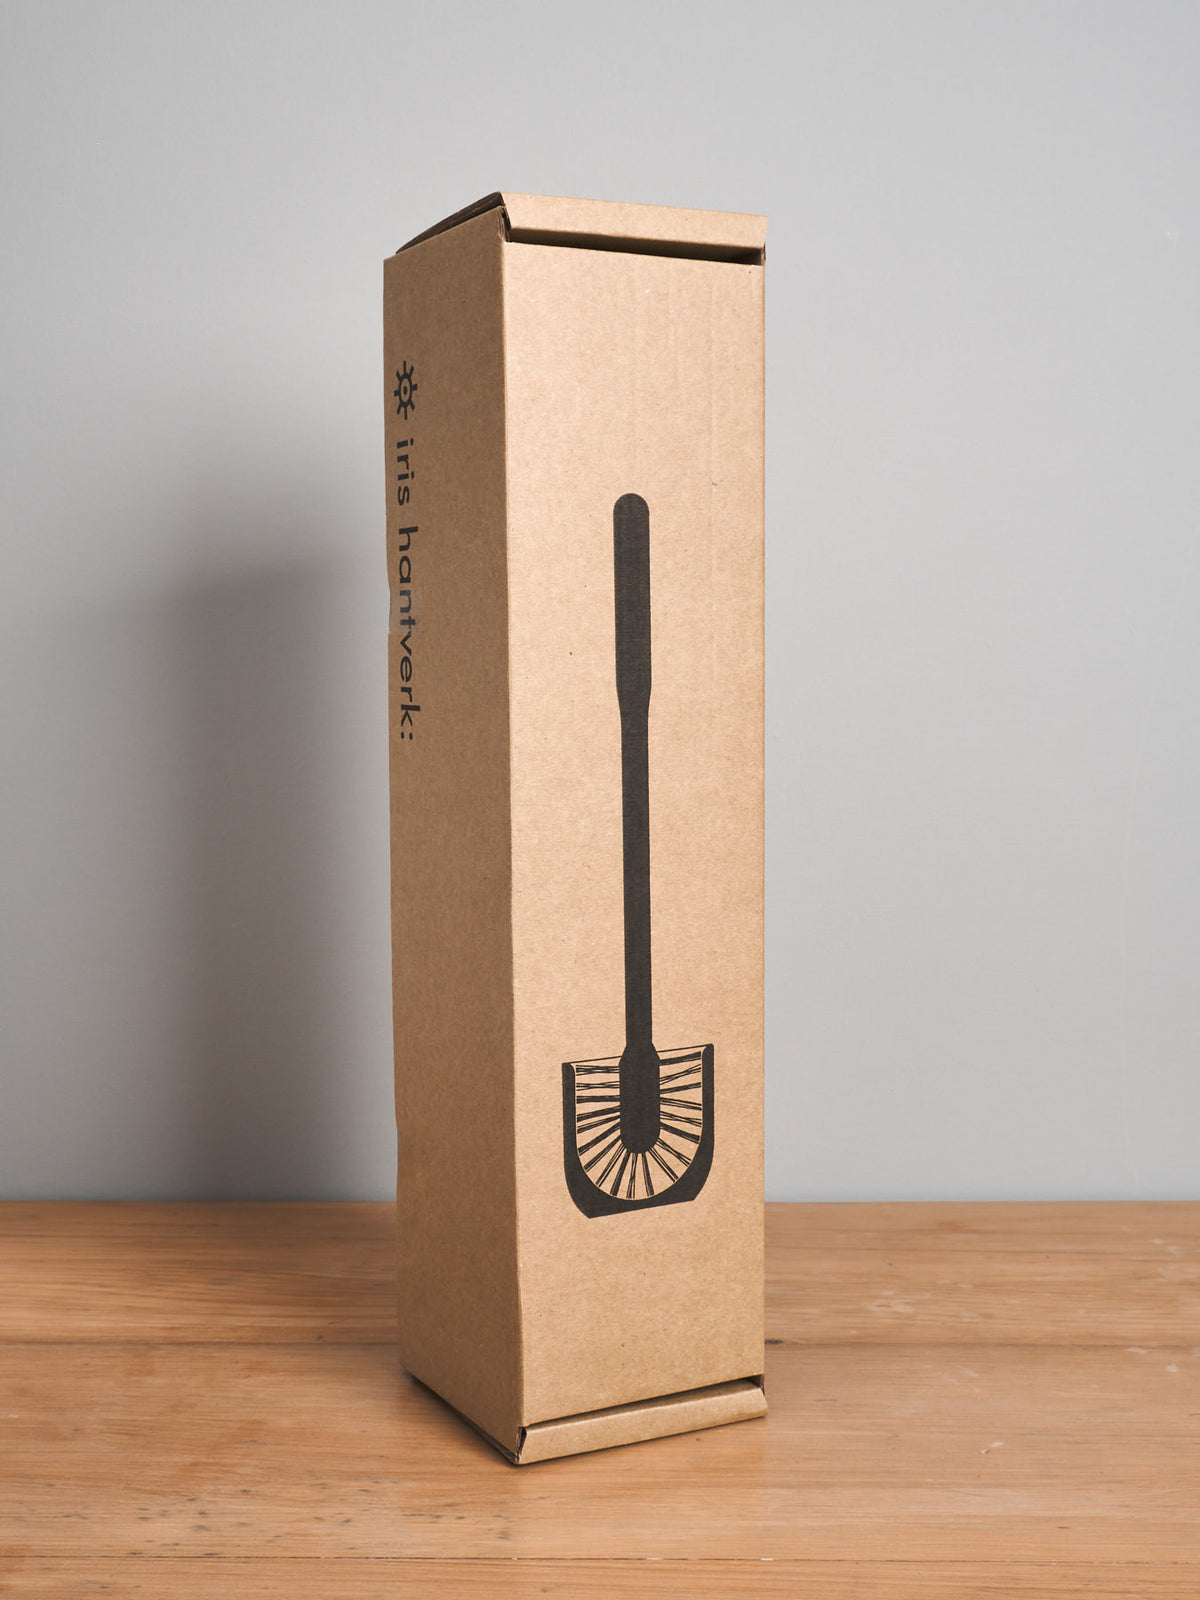 A cardboard Iris Hantverk product box with an image of a Iris Hantverk Toilet Brush + Toilet Roll Holder Set and the text &quot;#itsframework&quot; displayed on the side.